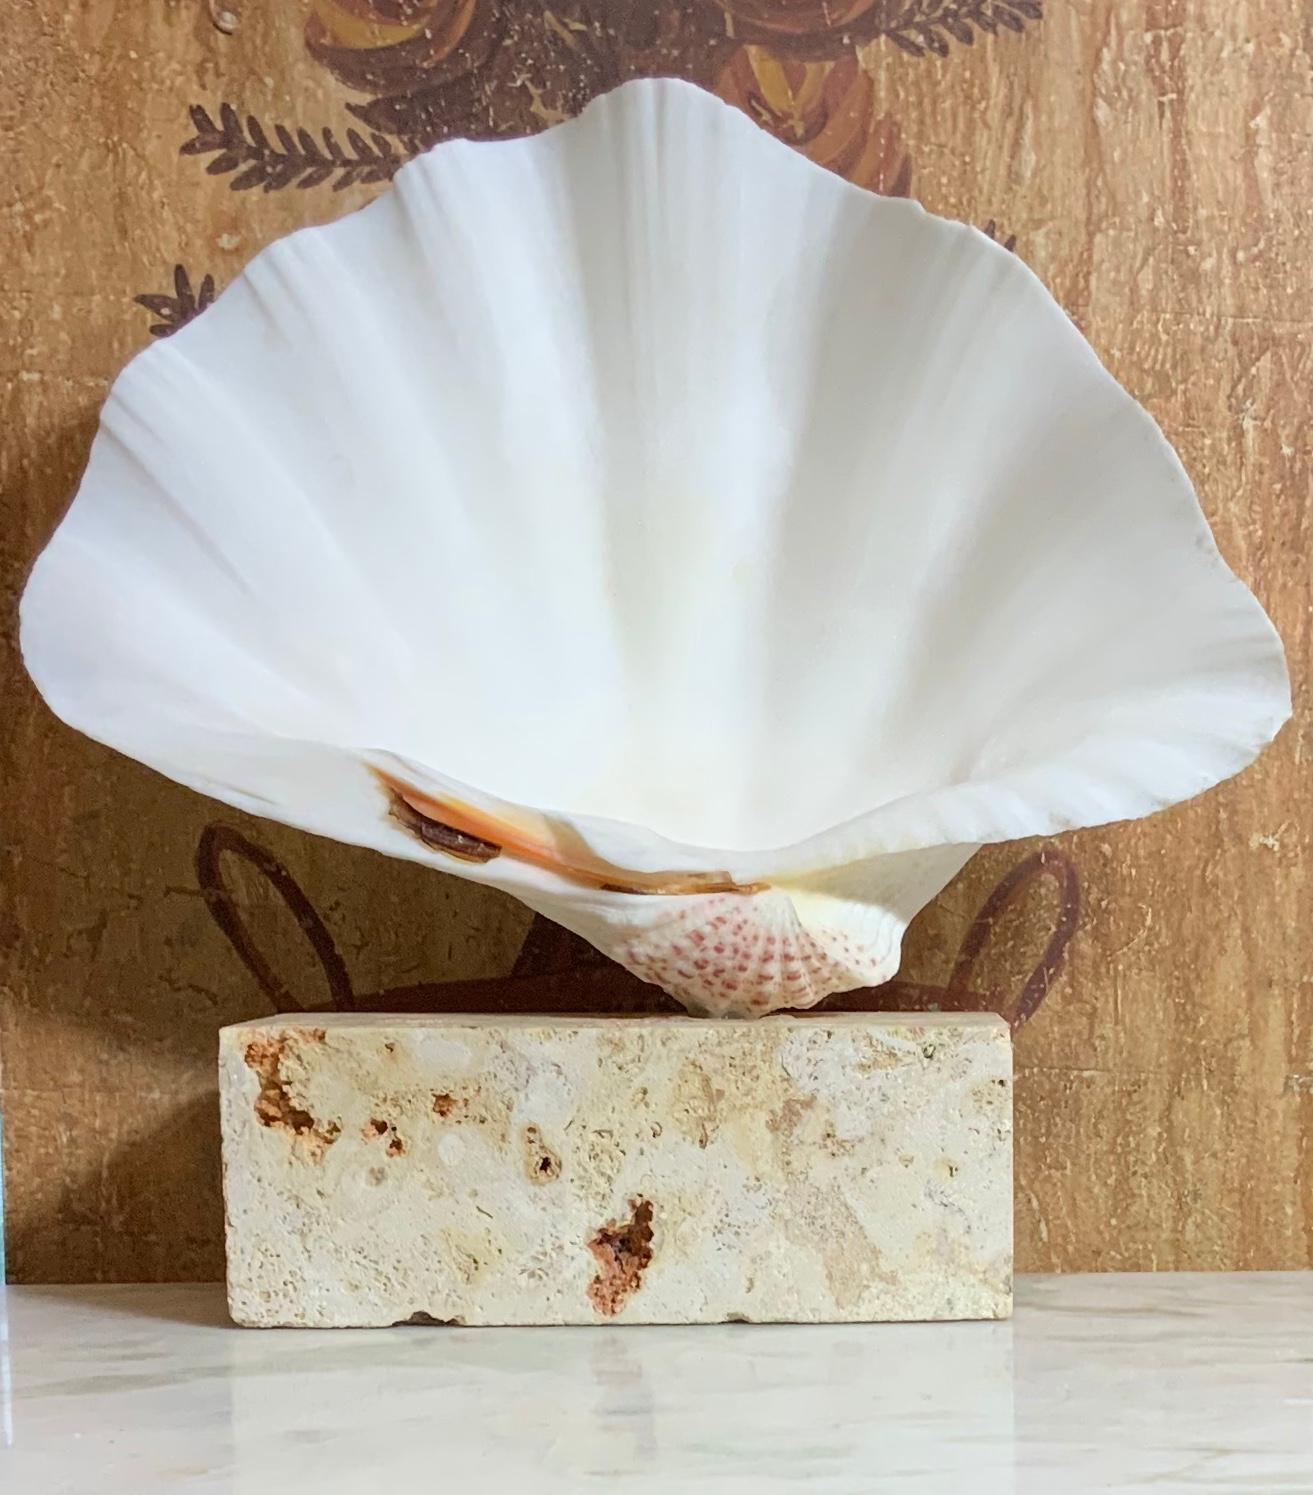 Beautiful natural clamshell with cream color patina ,professionally clean and mounted on original natural coral base. Great natural object of art for display.
Base size only: 8” width x4” depth x 3” high.